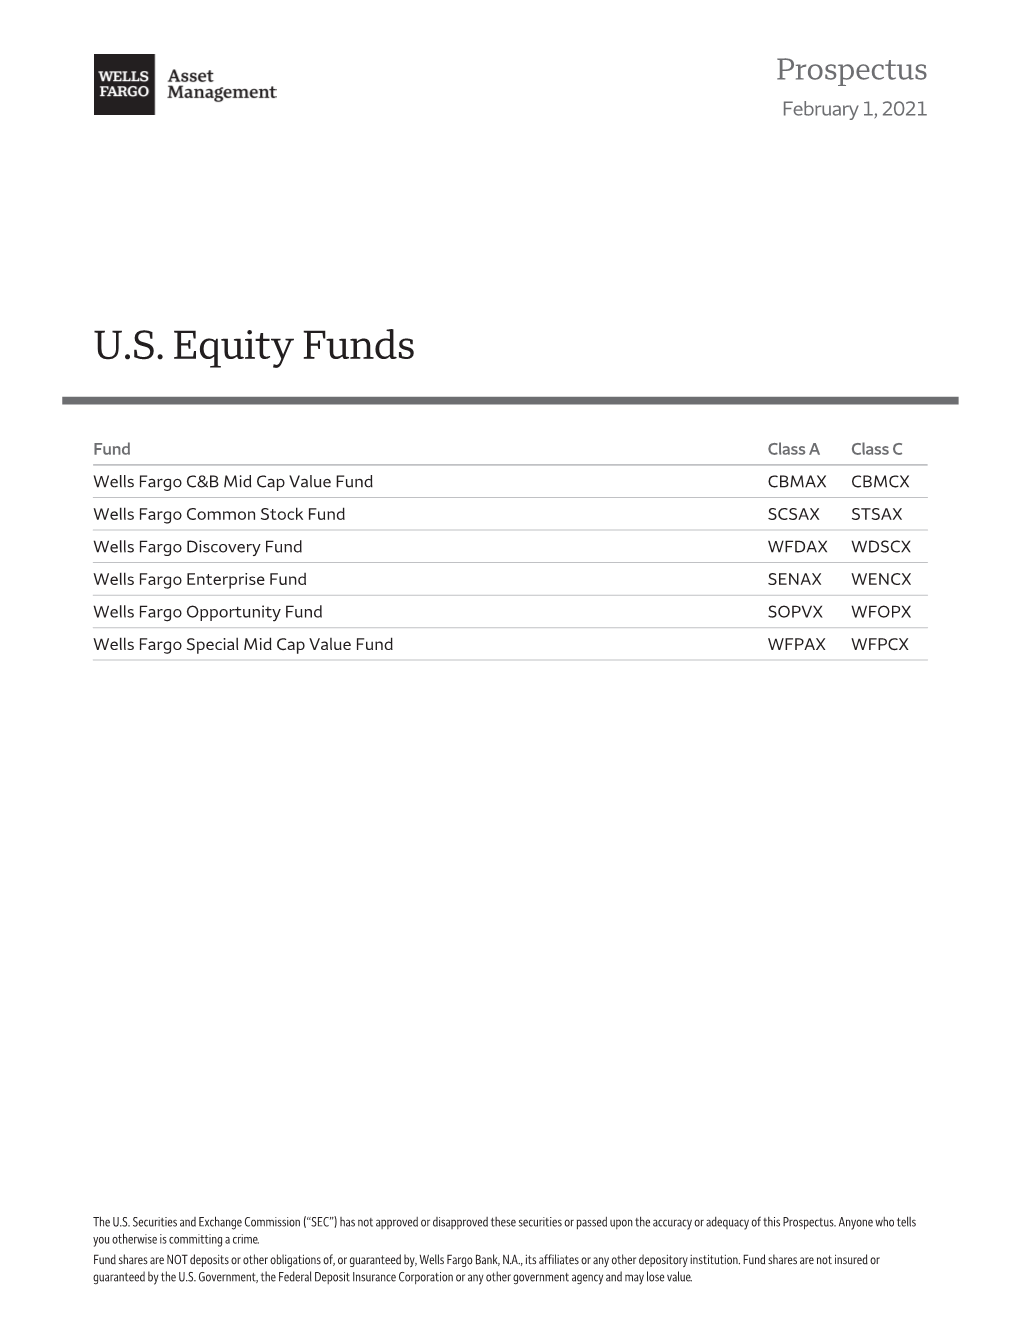 U.S. Equity Funds (A, C)